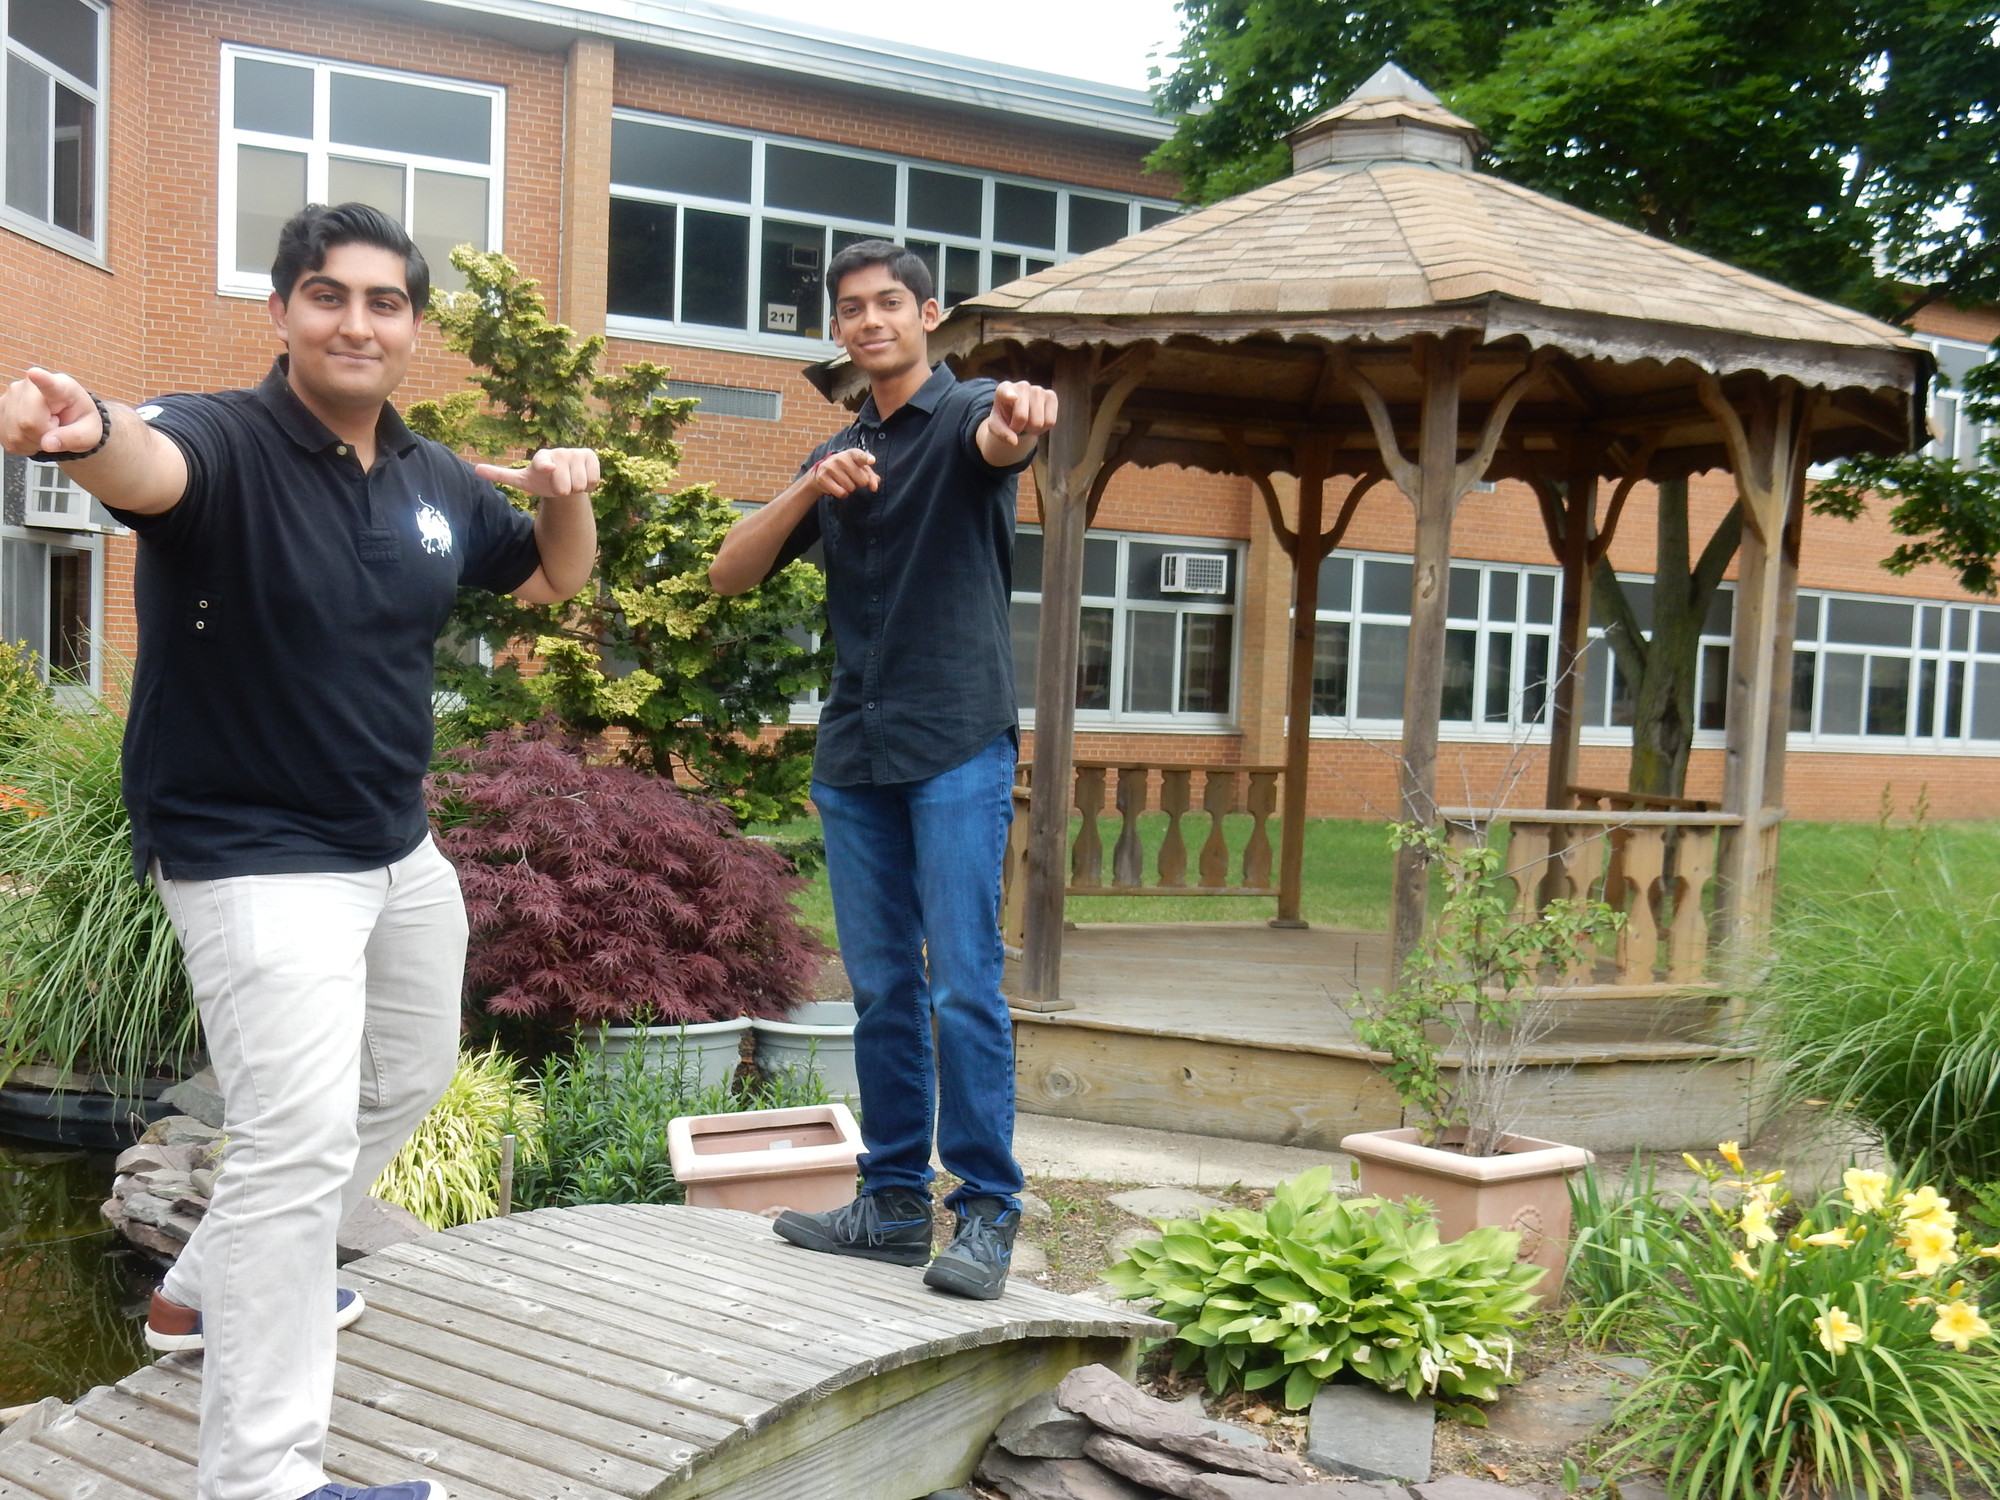 Rohit Bachani, W.T. Clarke’s salutatorian, left, and Pavithran Ravindran, the valedictorian, rose to the top of several organizations during their high school careers.